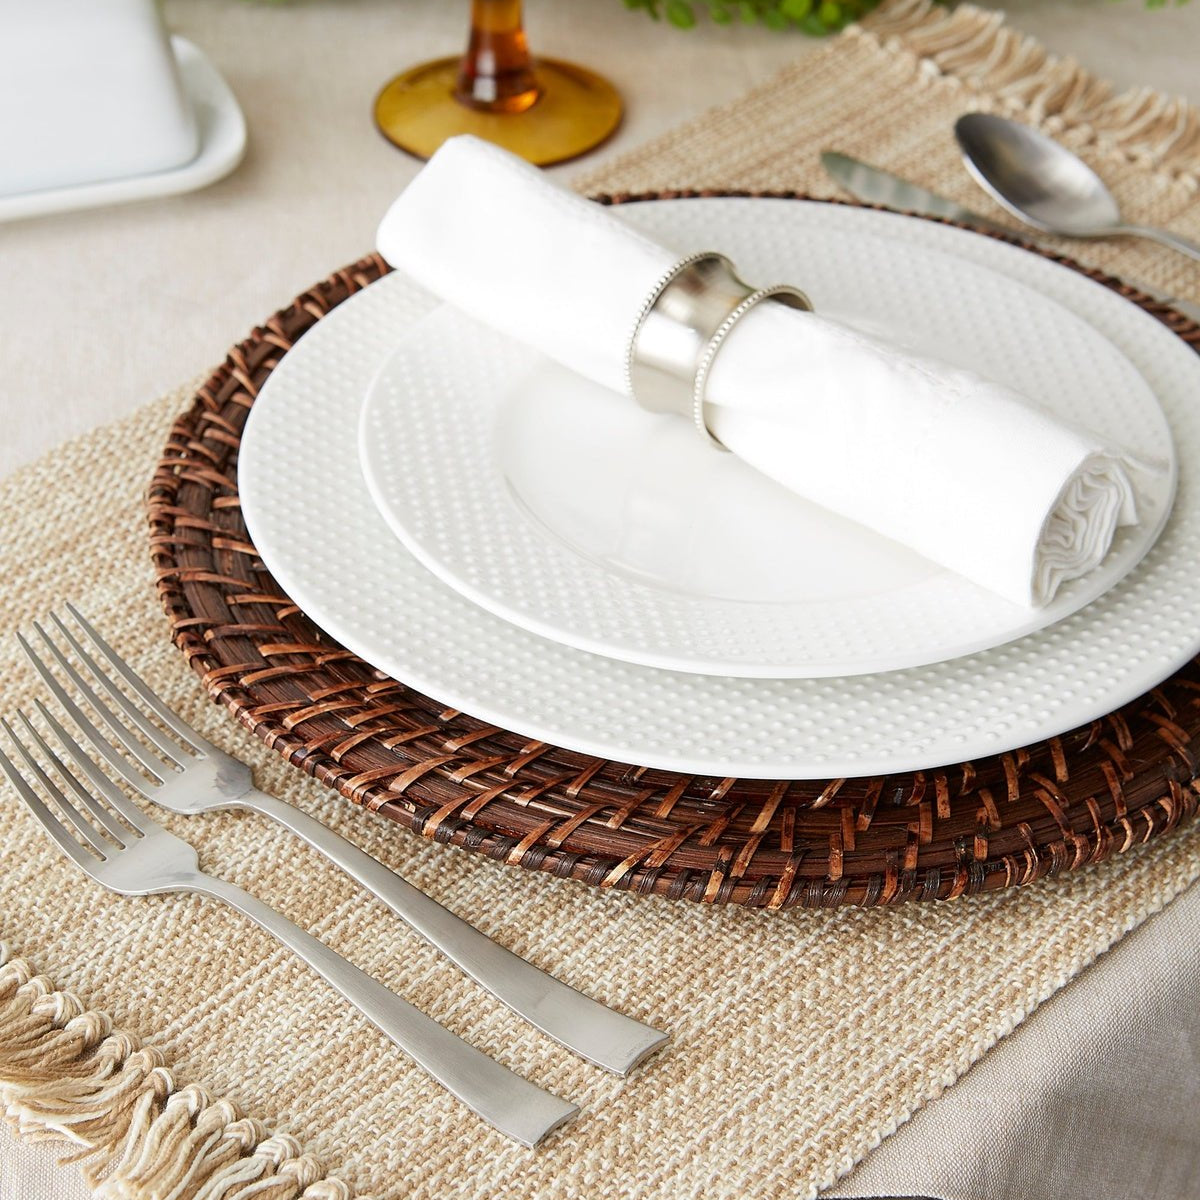 Taupe Variegated Fringe Placemats, Set of 6 - Placemats